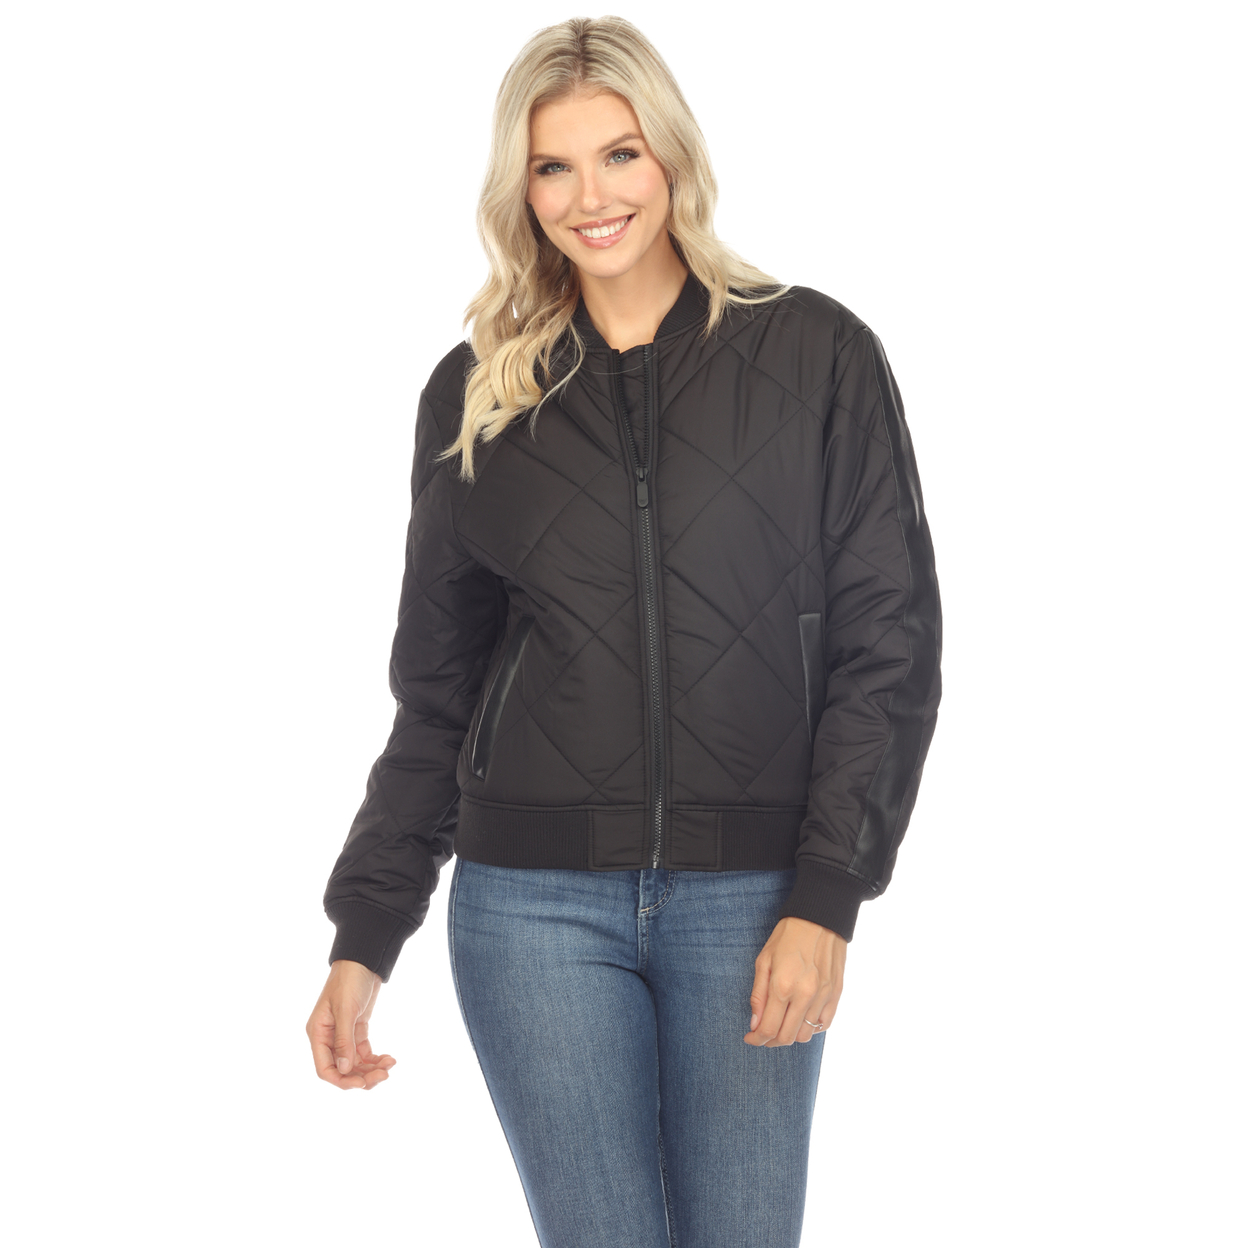 White Mark Women's Quilted Puffer Bomber Jacket - Black, Small